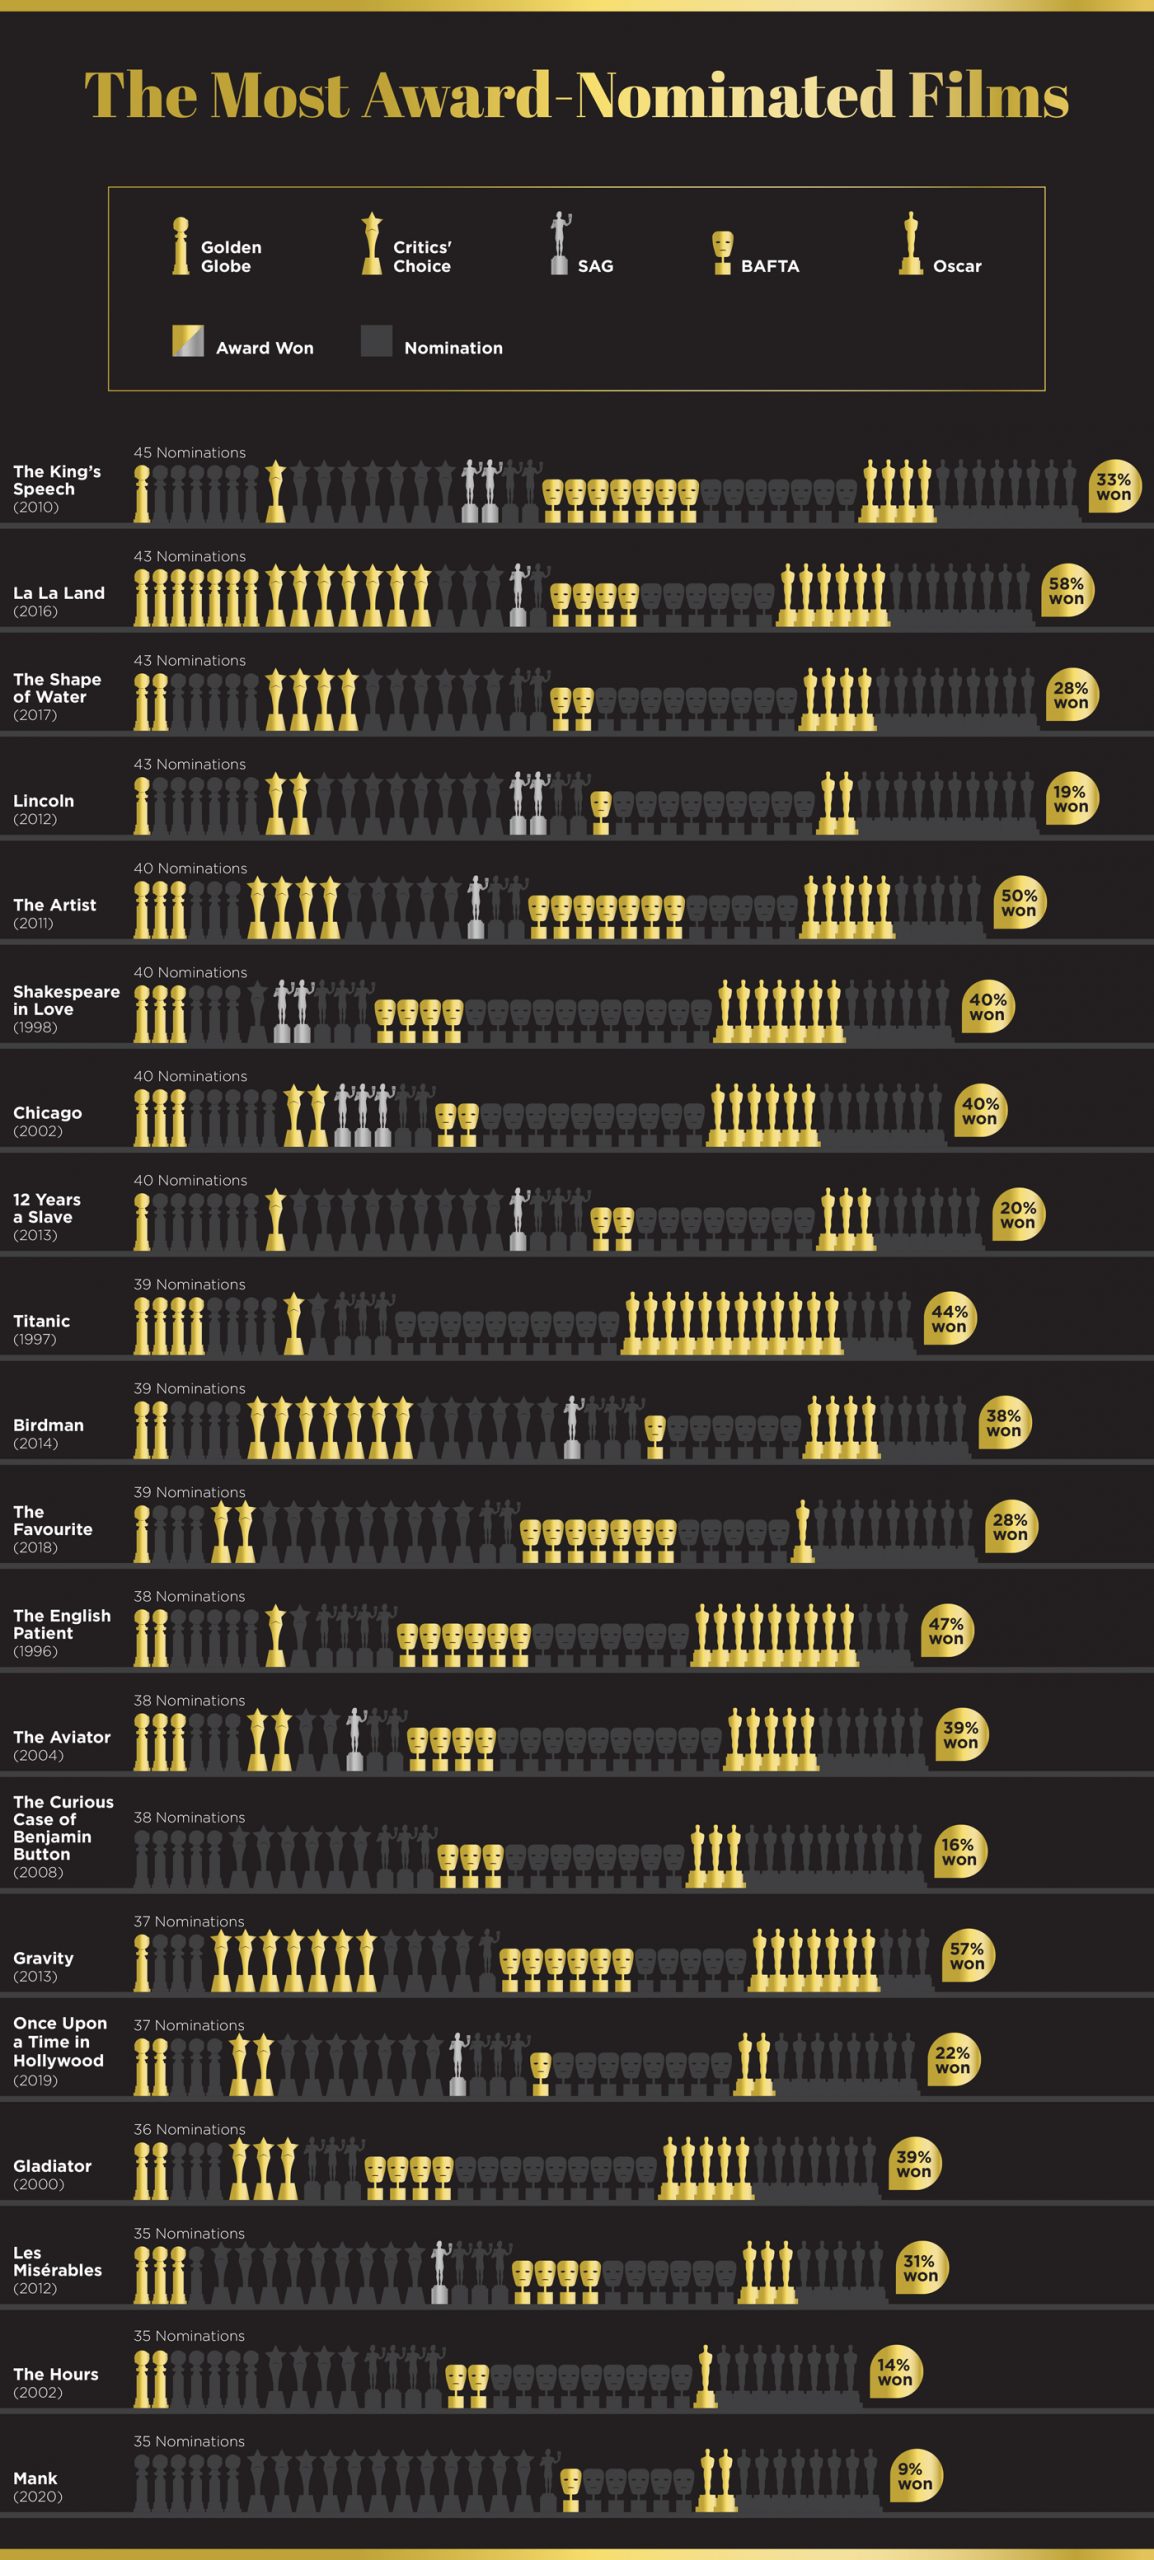 Graphic chart showing the films with the most Oscar Nominations